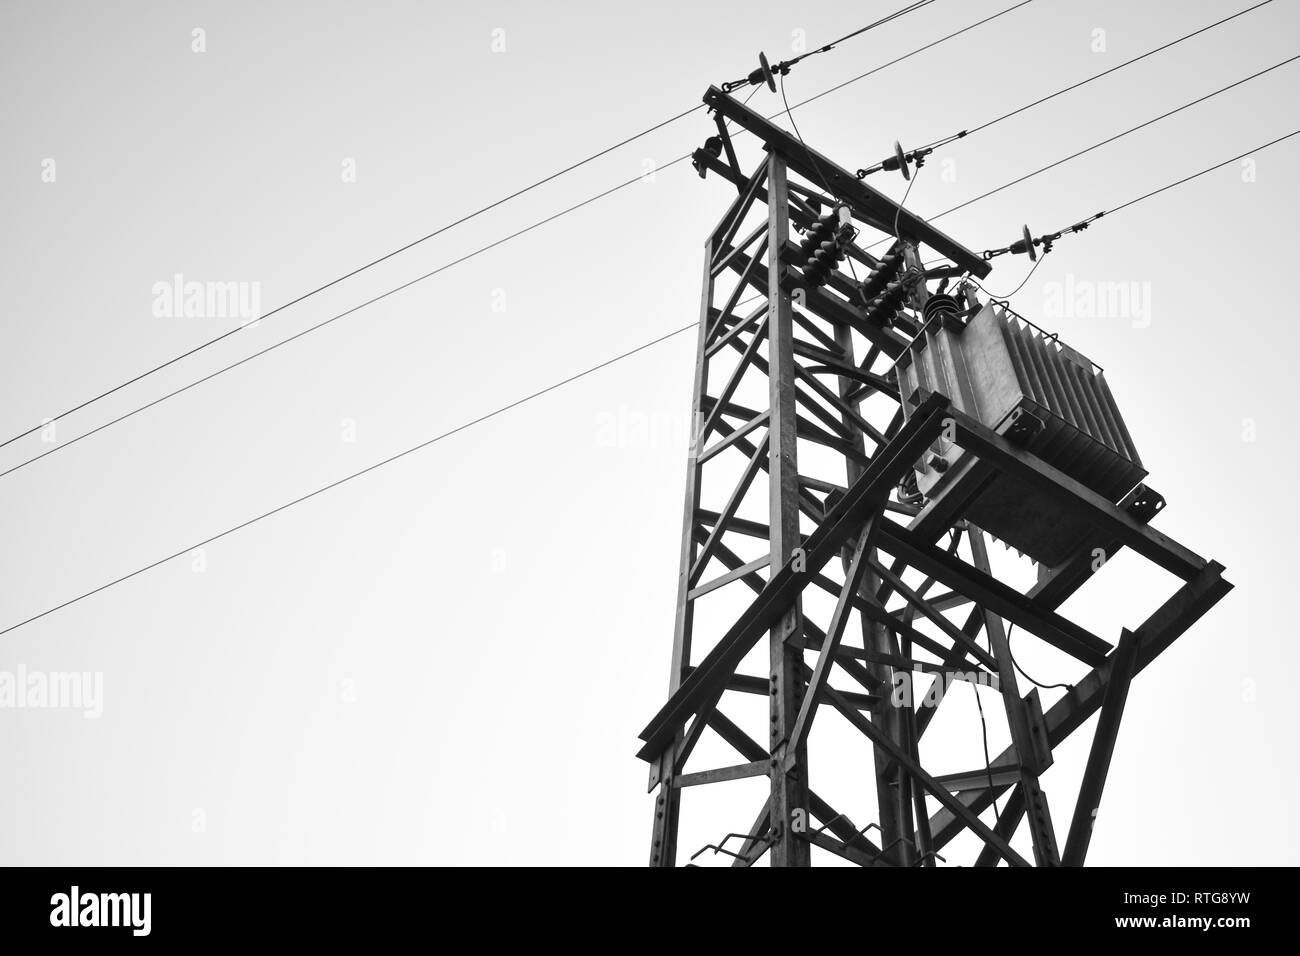 Utility pole with overhead power lines and transformer, black and white Stock Photo